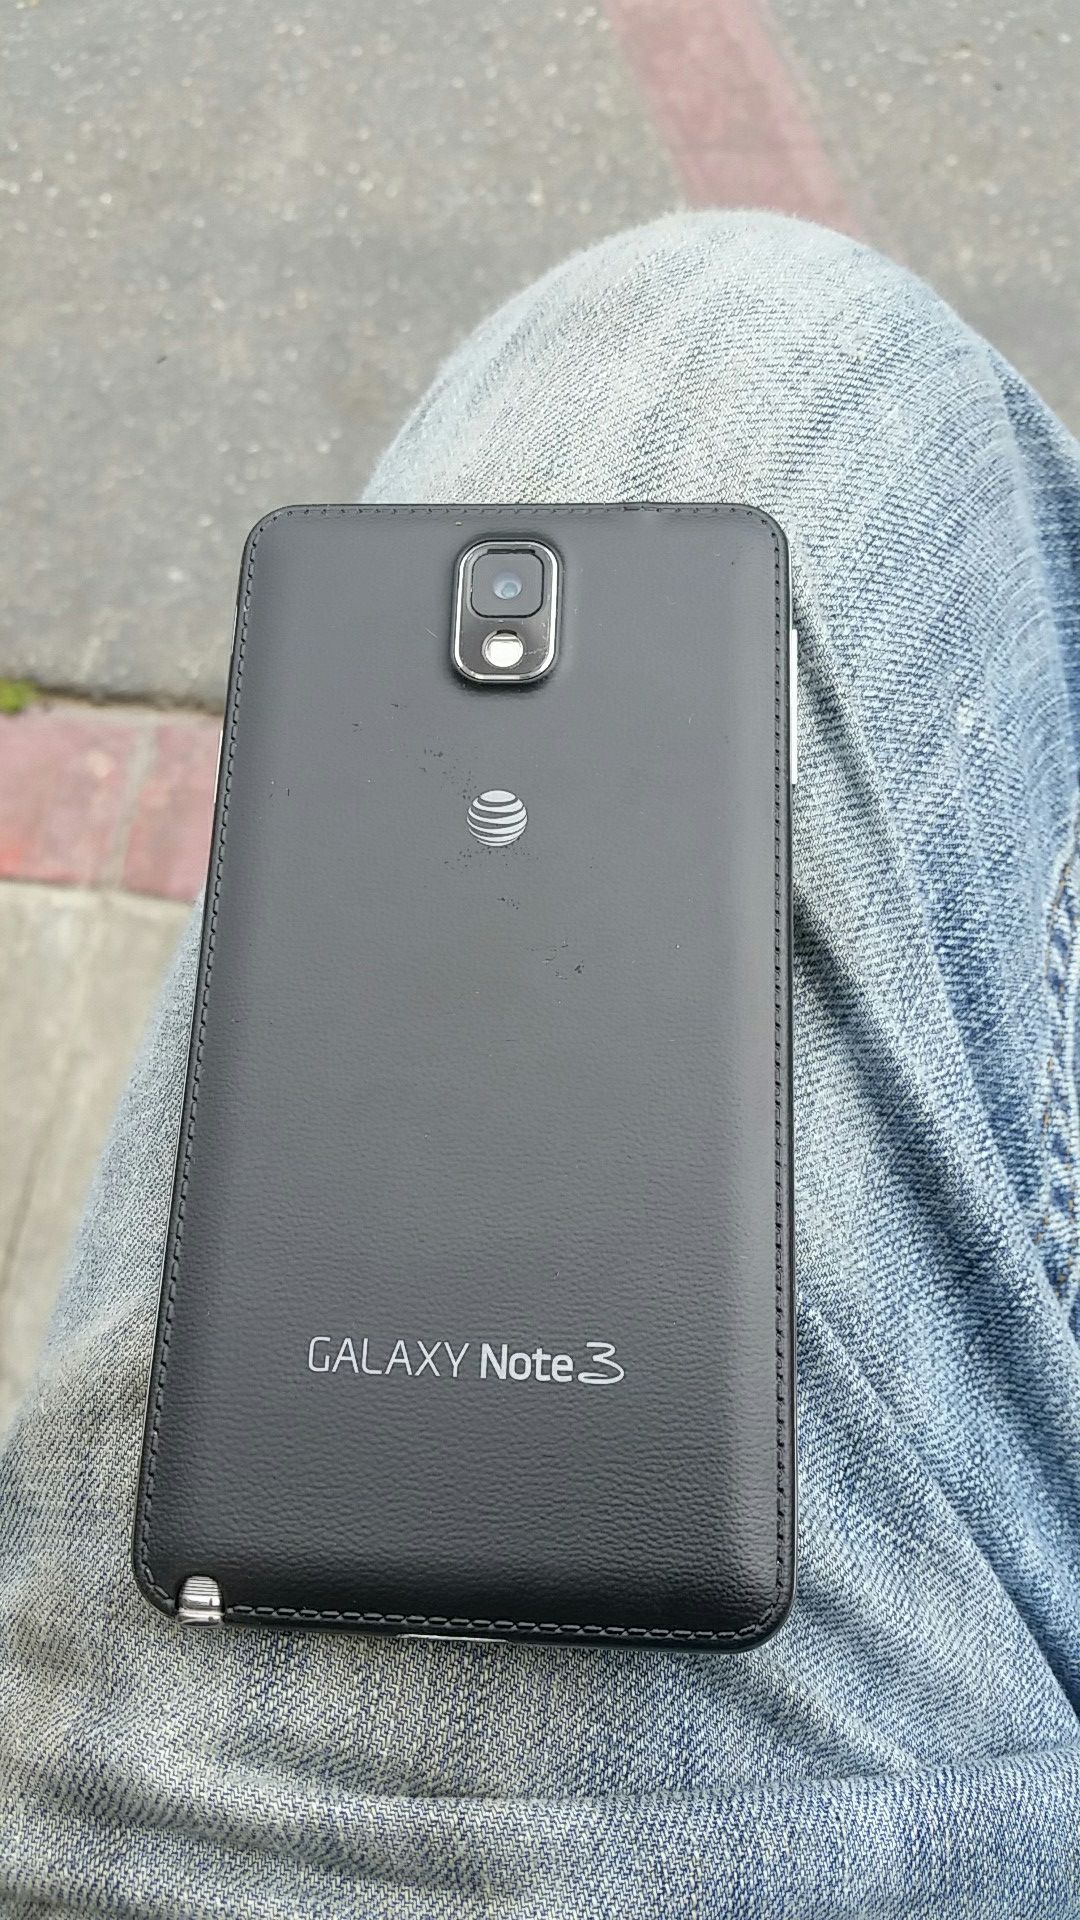 Samsung Galaxy Note three for at&t trade for verizon